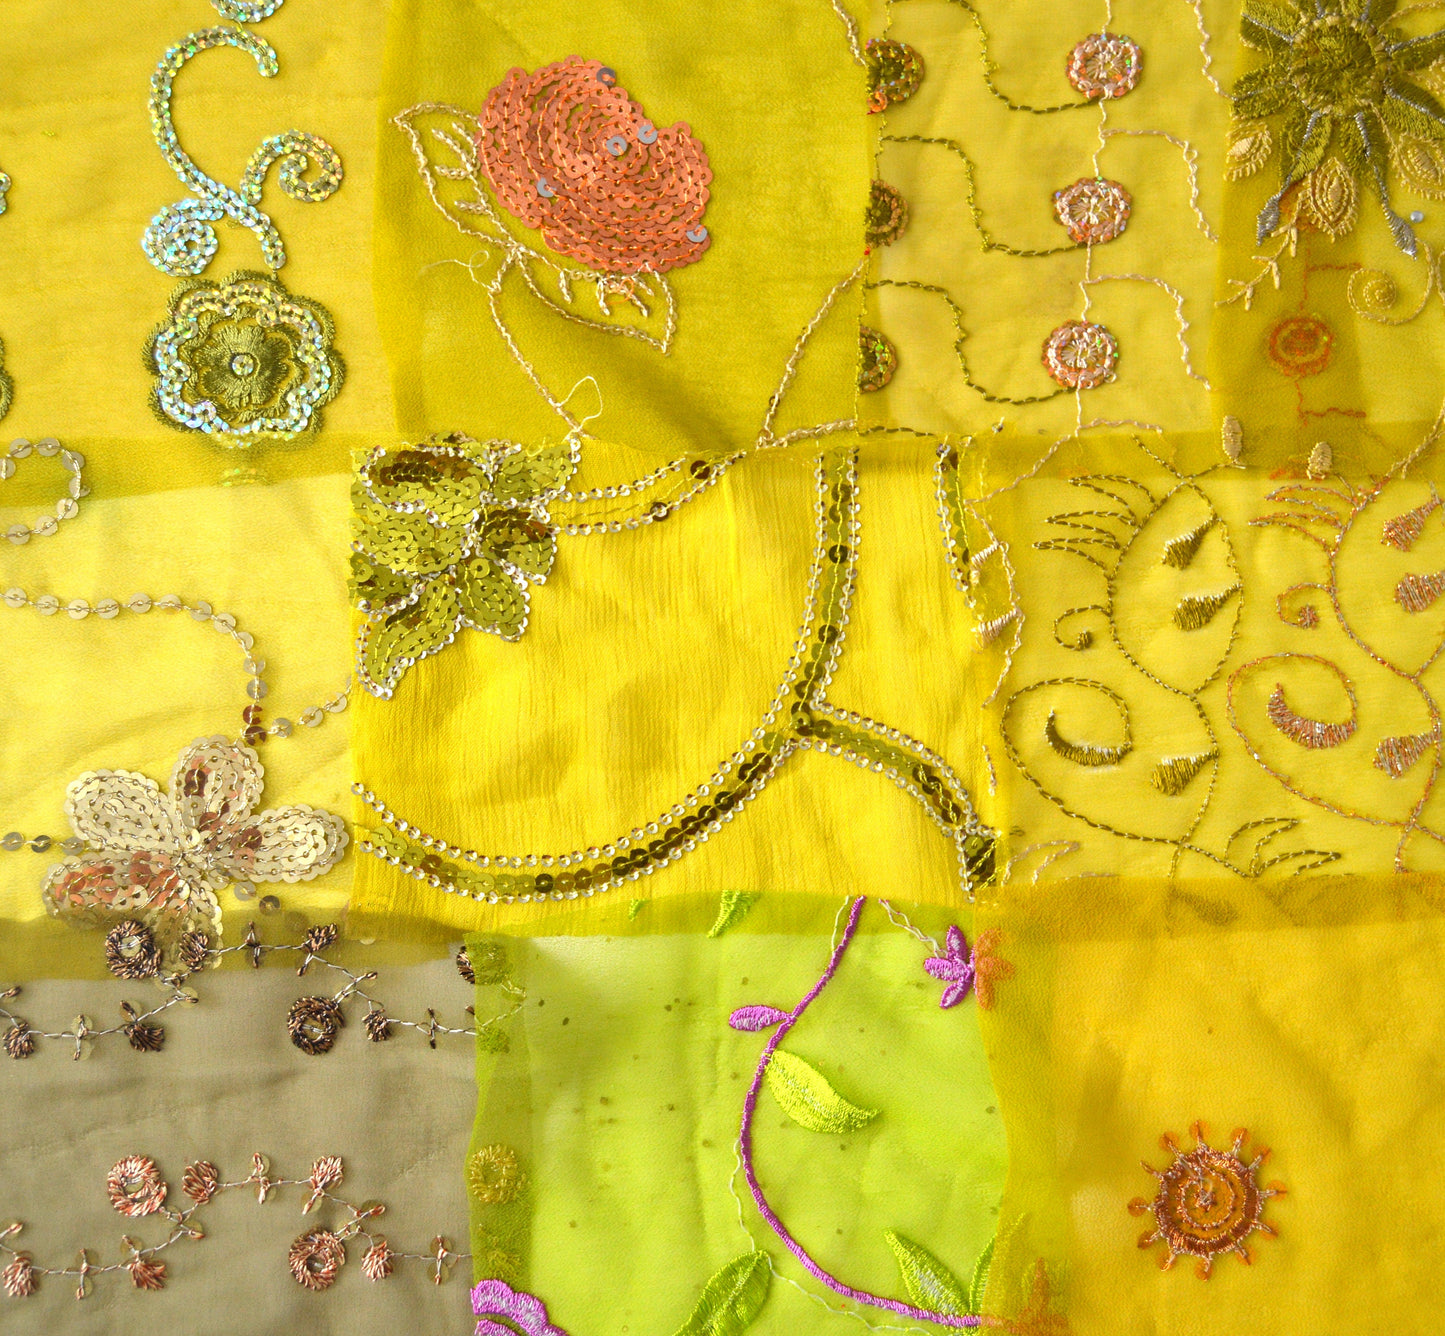 Lime Green Assorted Embellished Sari Fabric Remnants Scraps - 10 Pieces